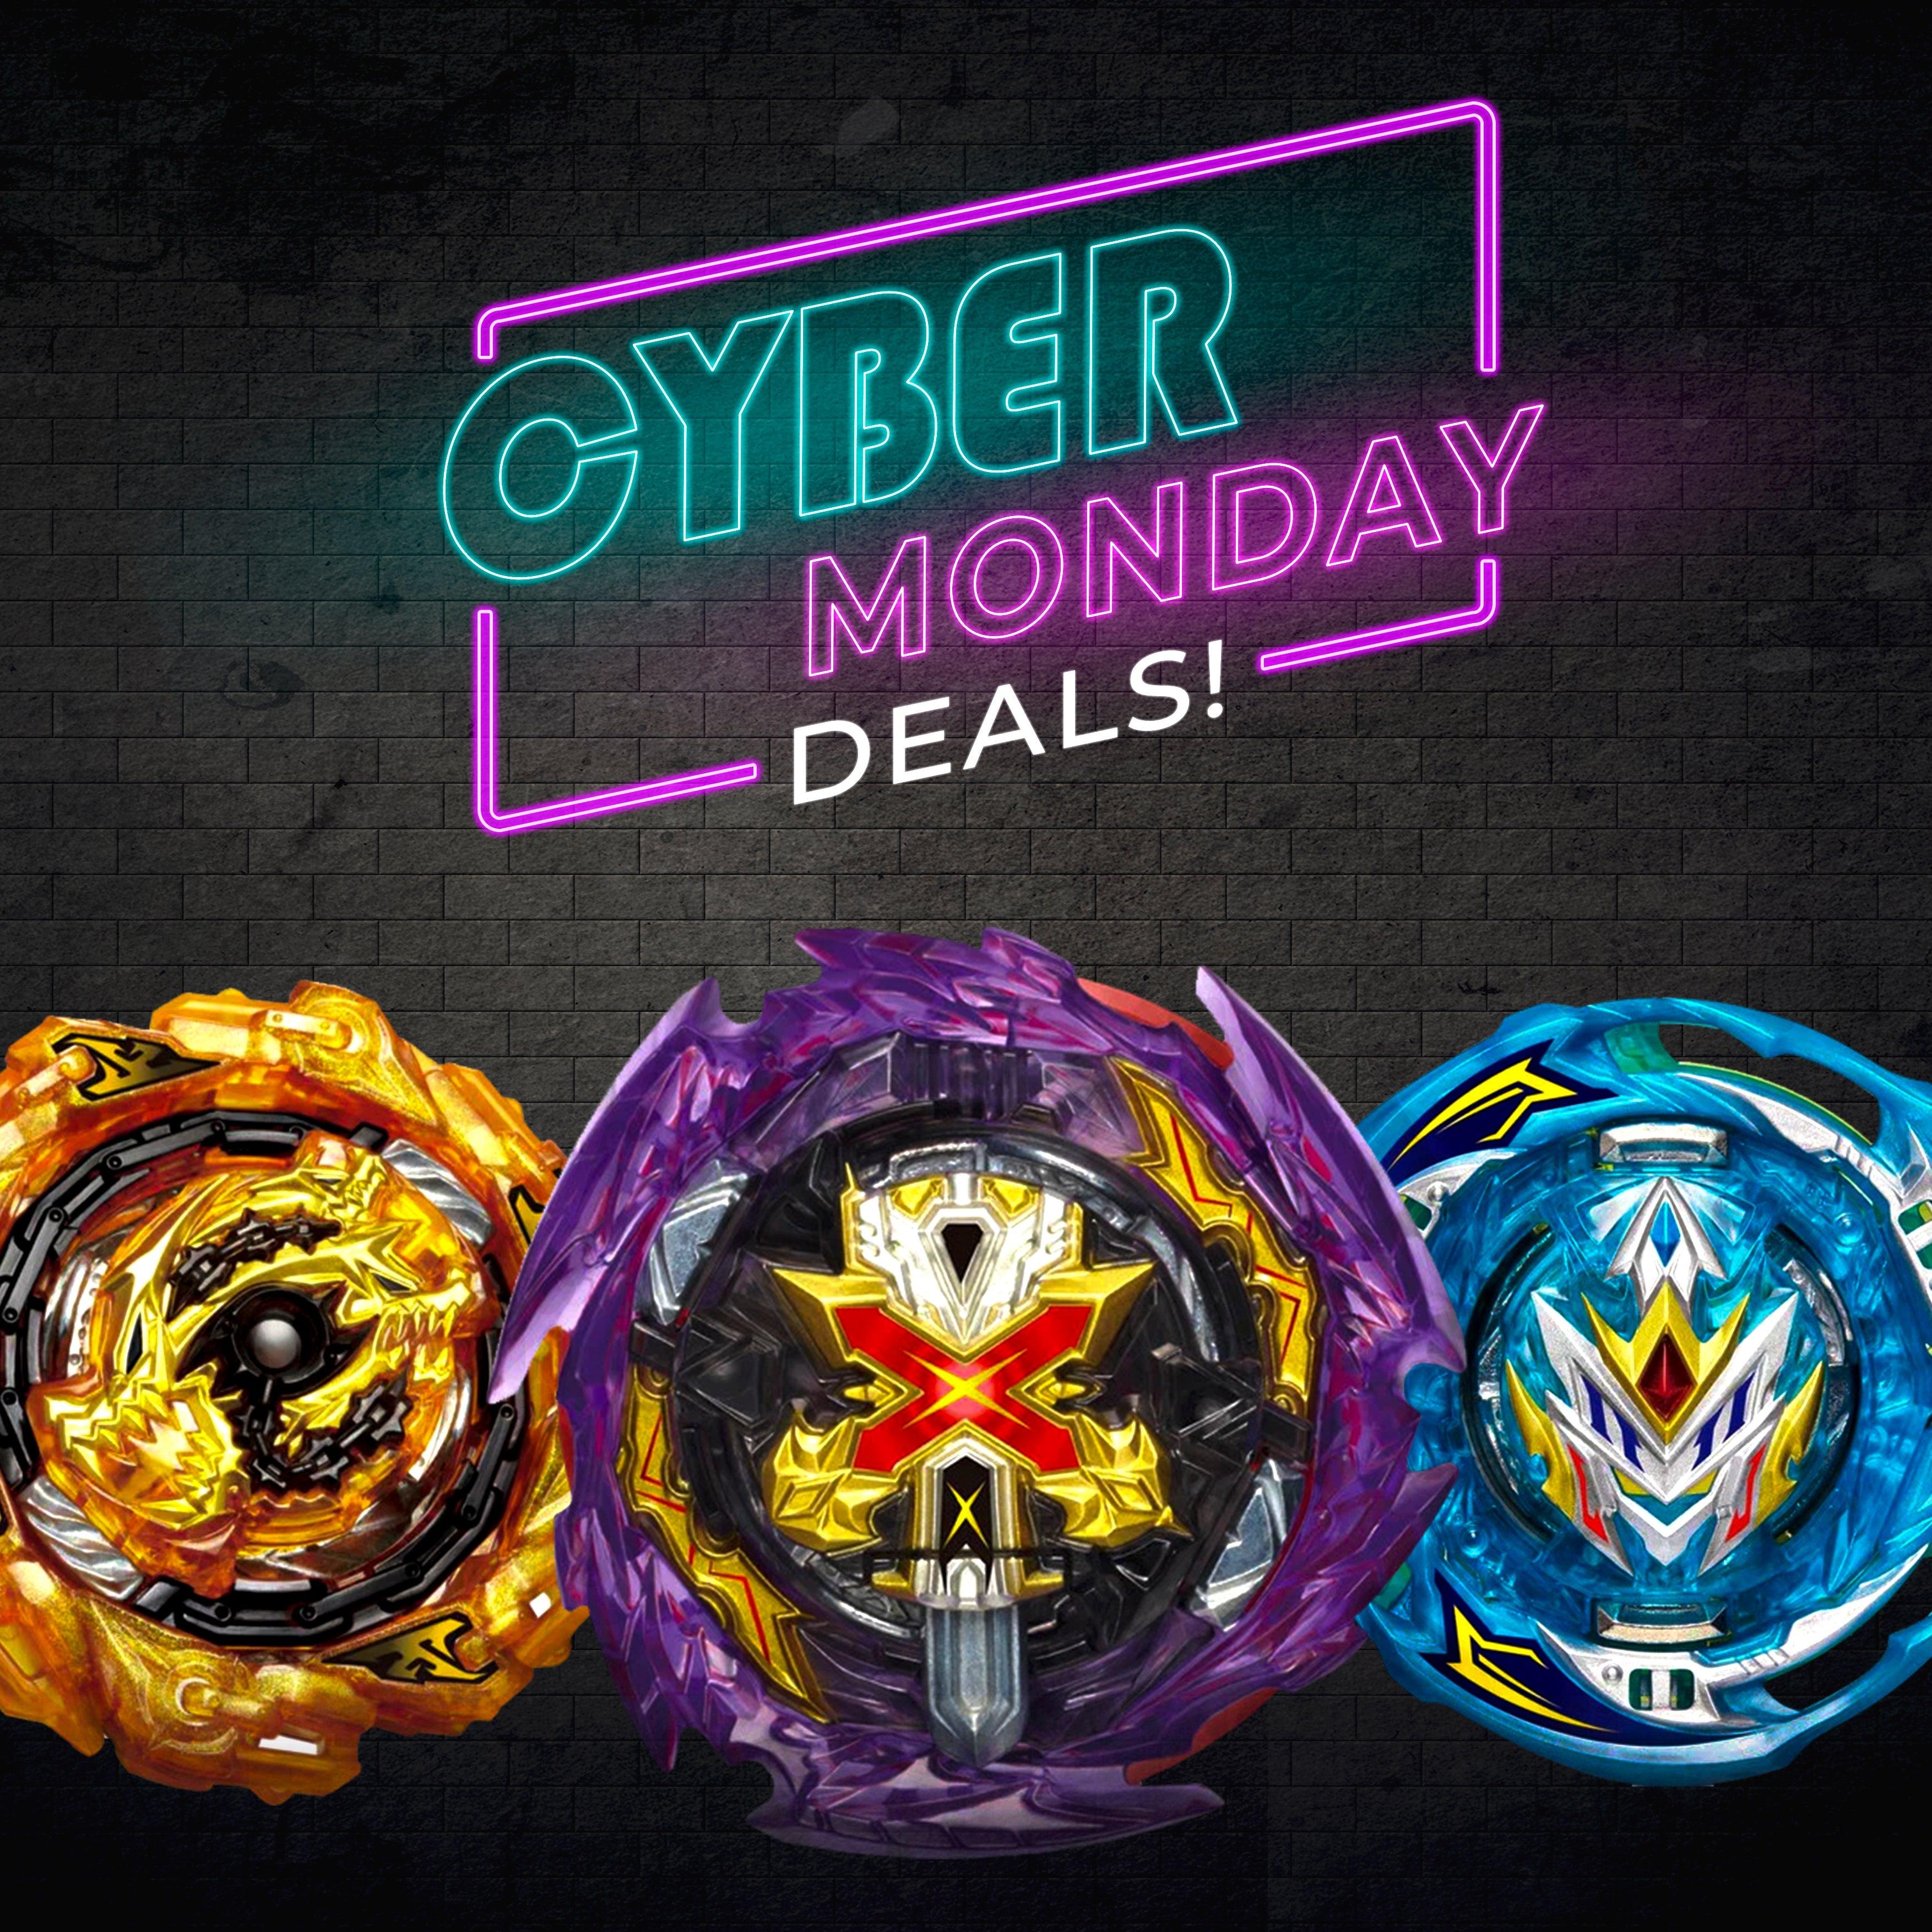 Discount on Cybermonday deals of Beyblades